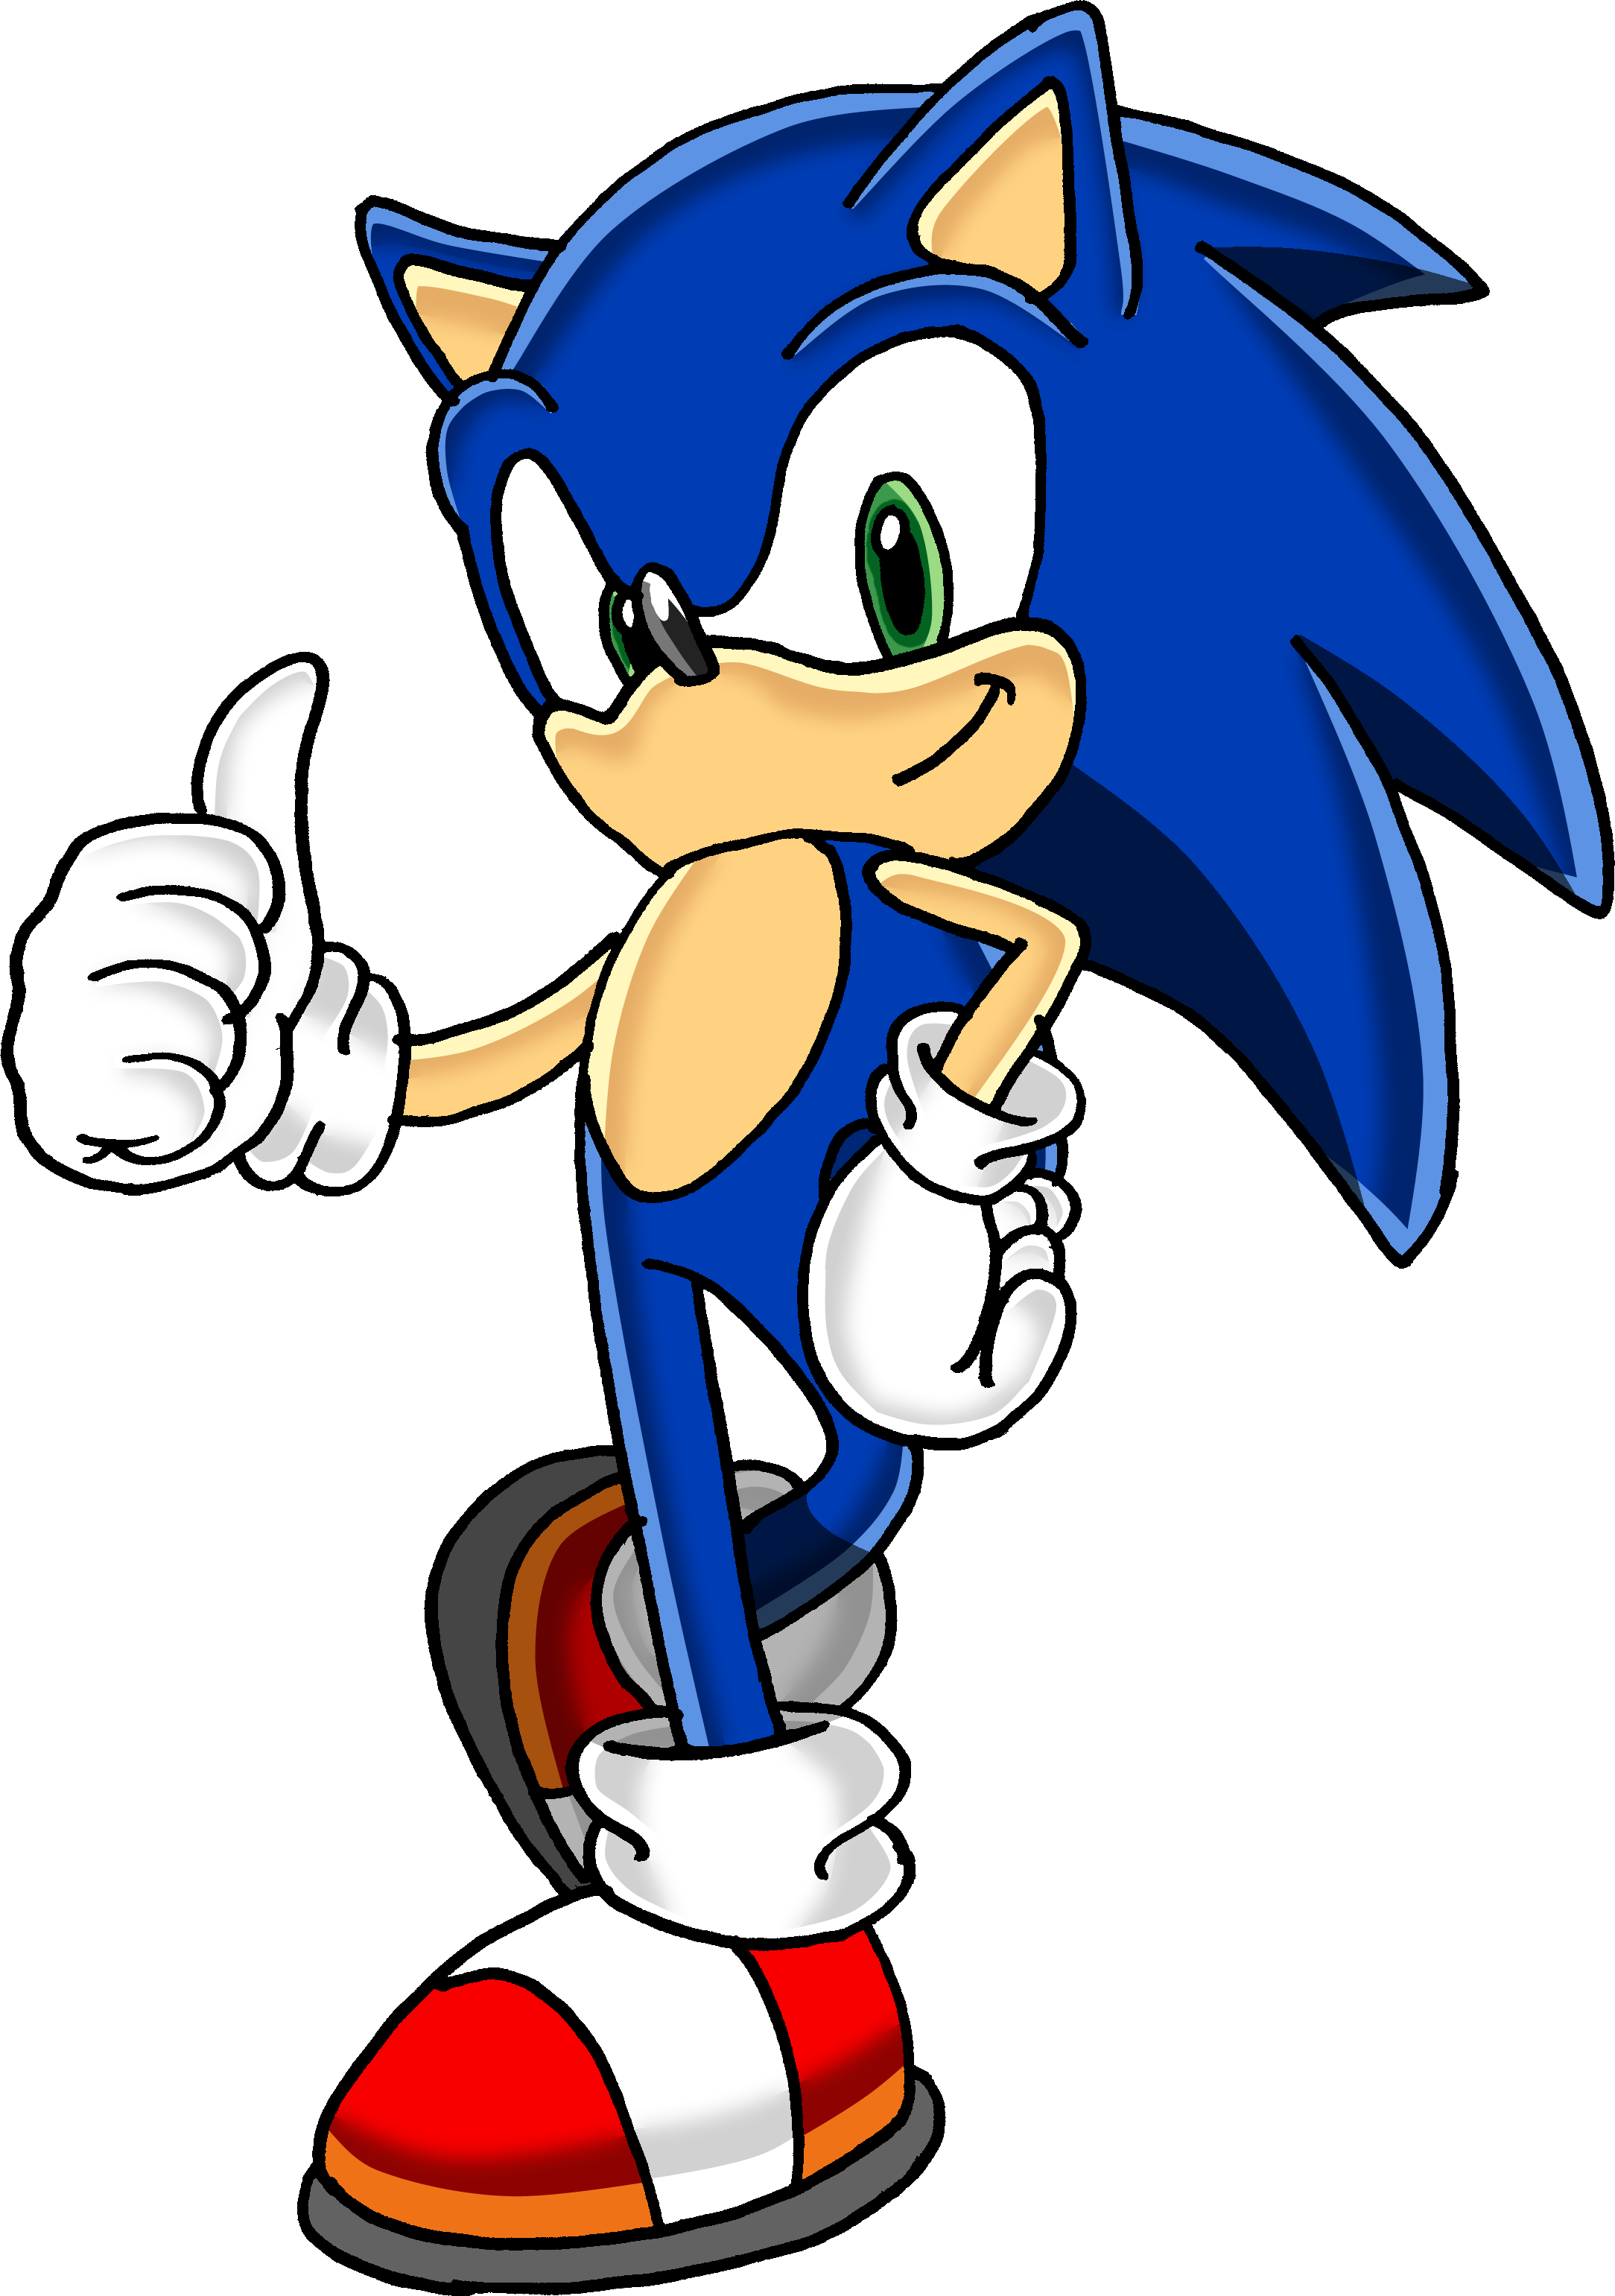 Sonic The Hedgehog Png - Sonic The Hedgehog Png 13 Png Image, Transparent background PNG HD thumbnail